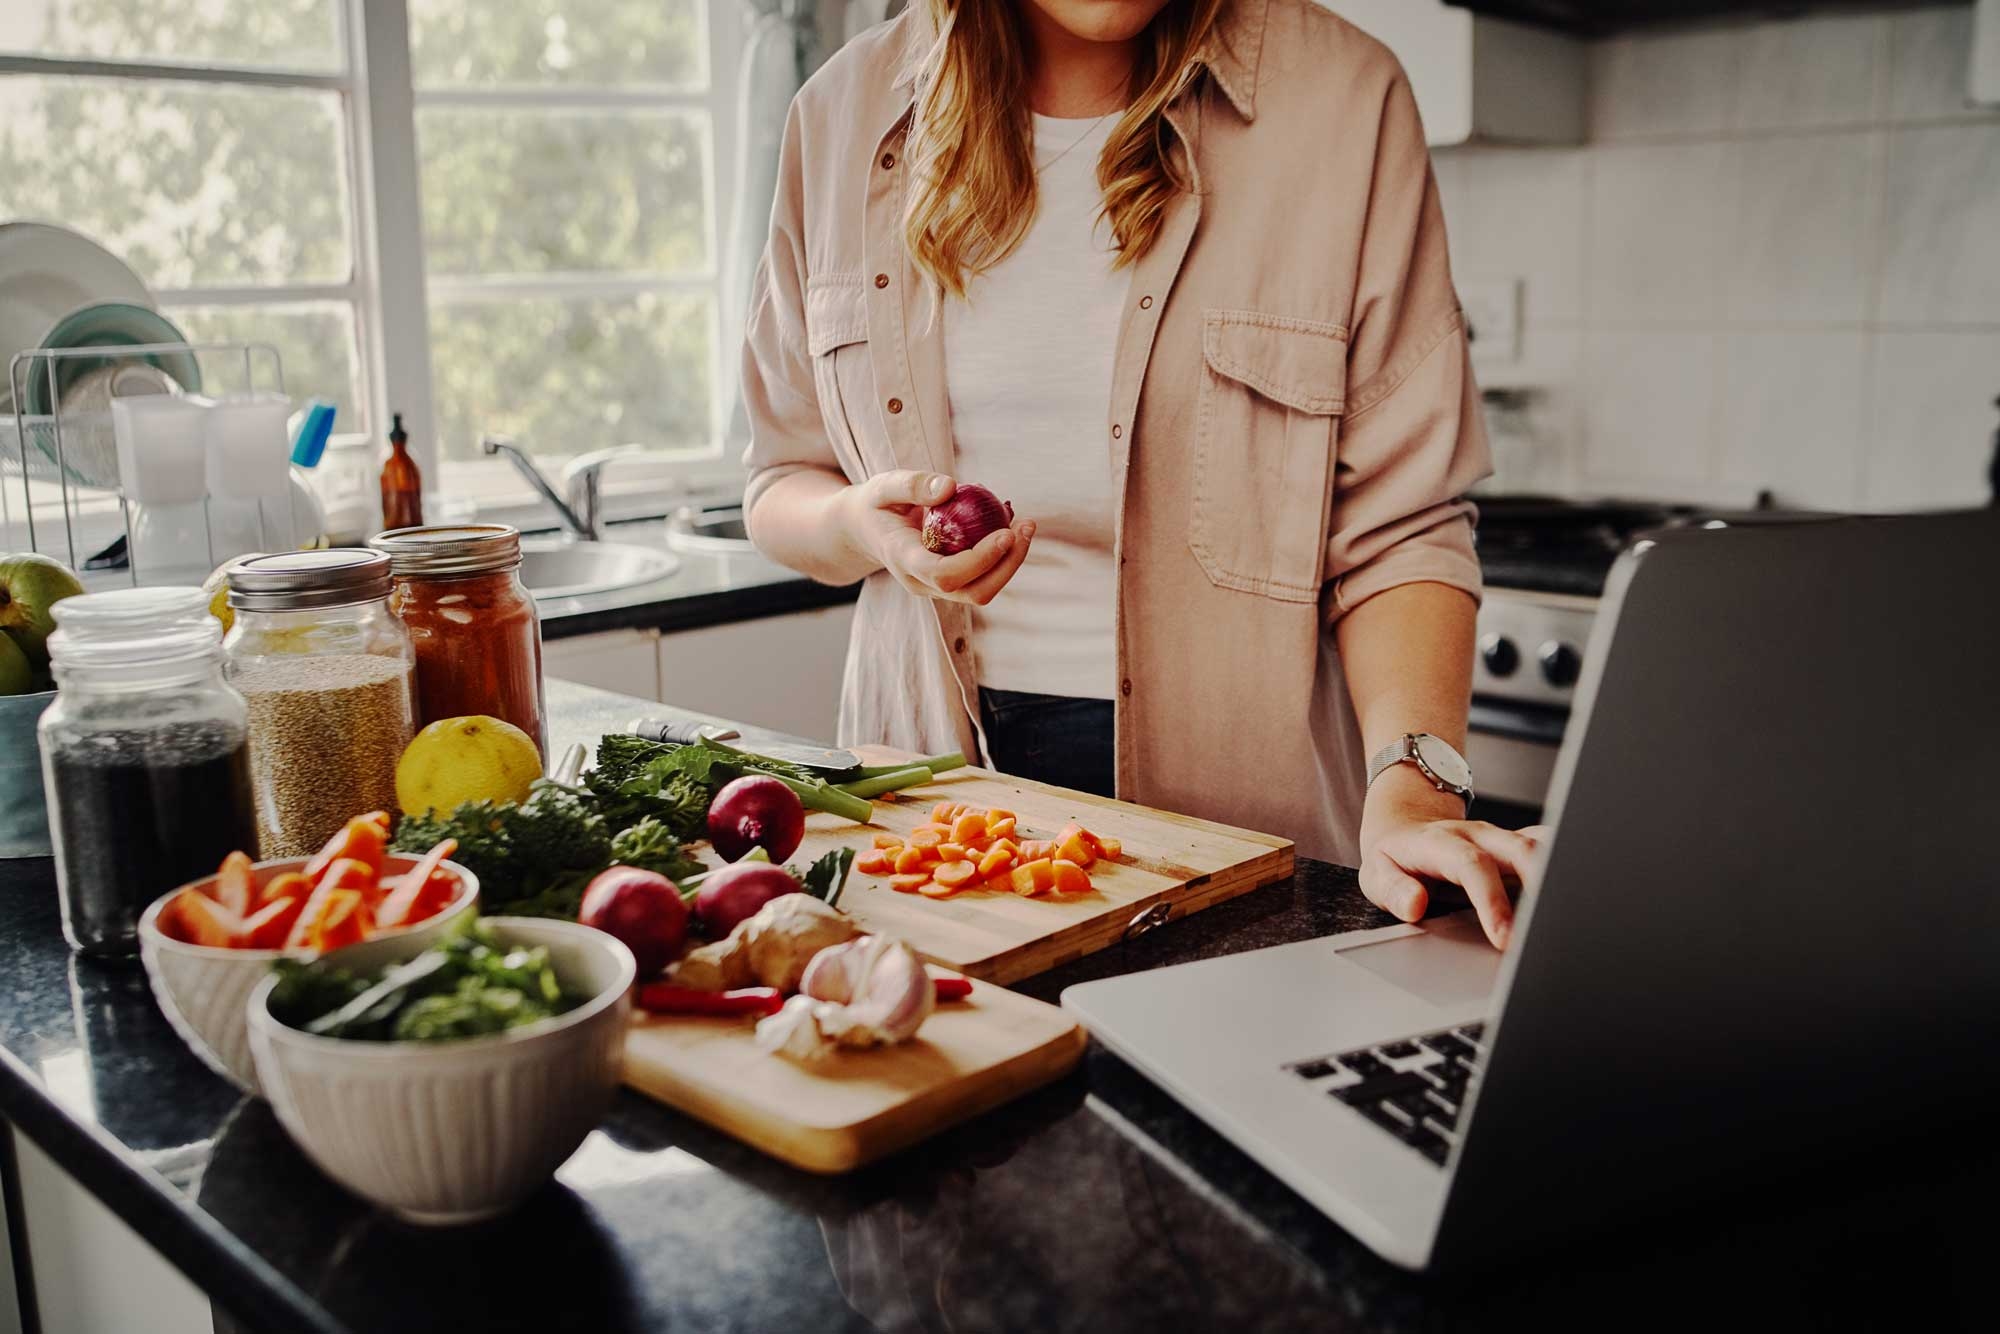 A woman is prepping food at her kitchen bench while looking at a recipe on her laptop